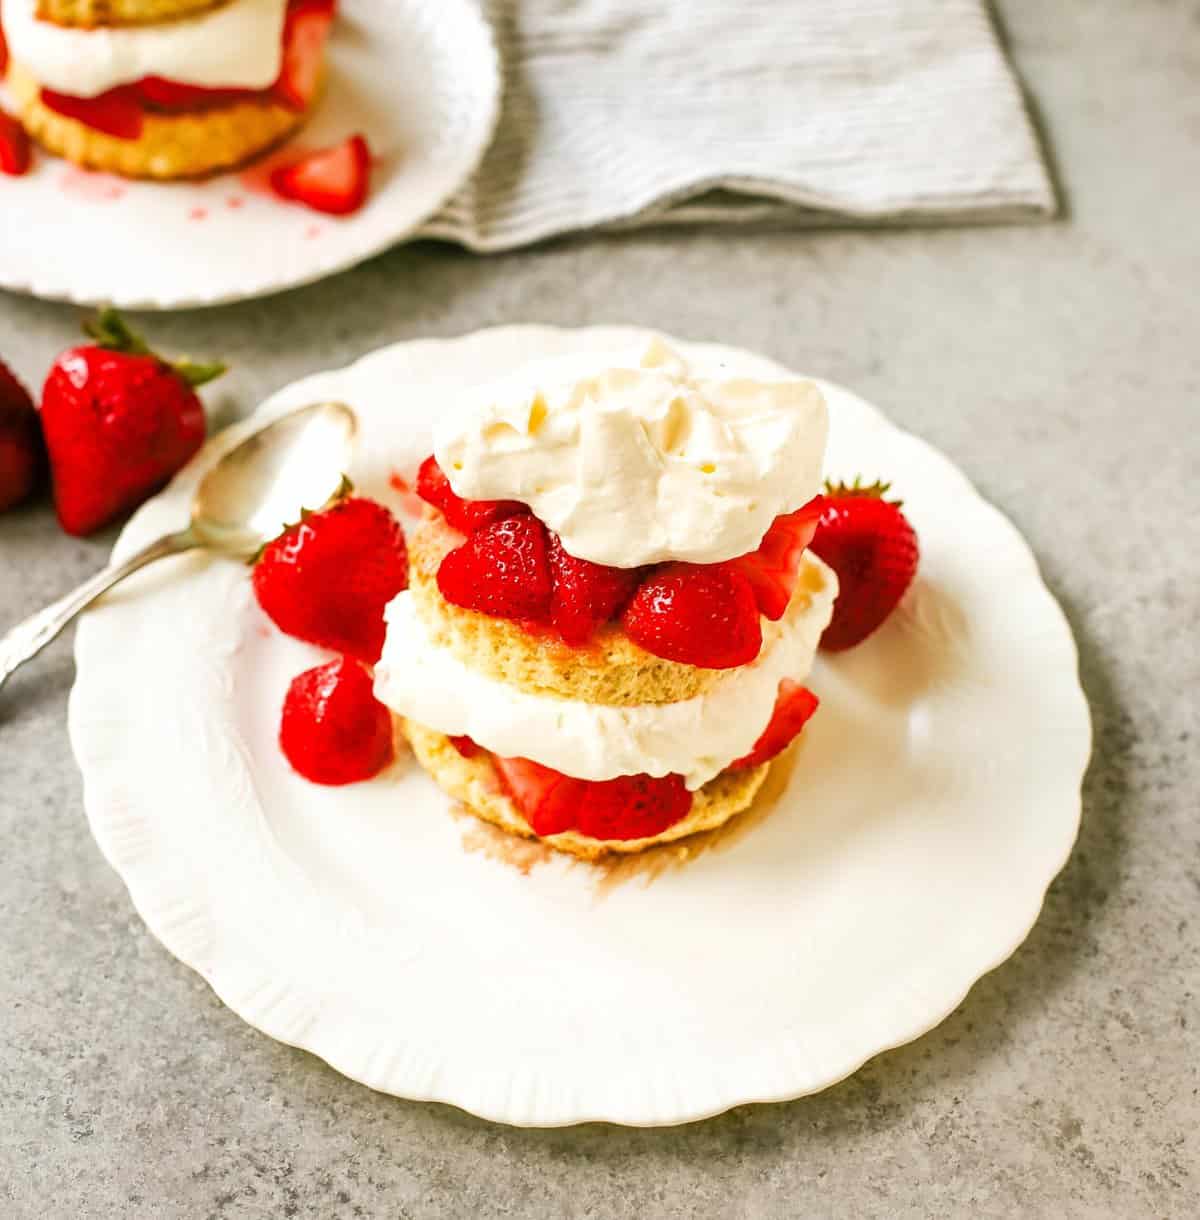 The Best Strawberry Shortcake with Homemade Sweet Biscuits, Sliced Strawberries, and Sweetened Whipped Cream. The sweet biscuits paired with sugared, syrupy strawberries, and fluffy whipped cream. 